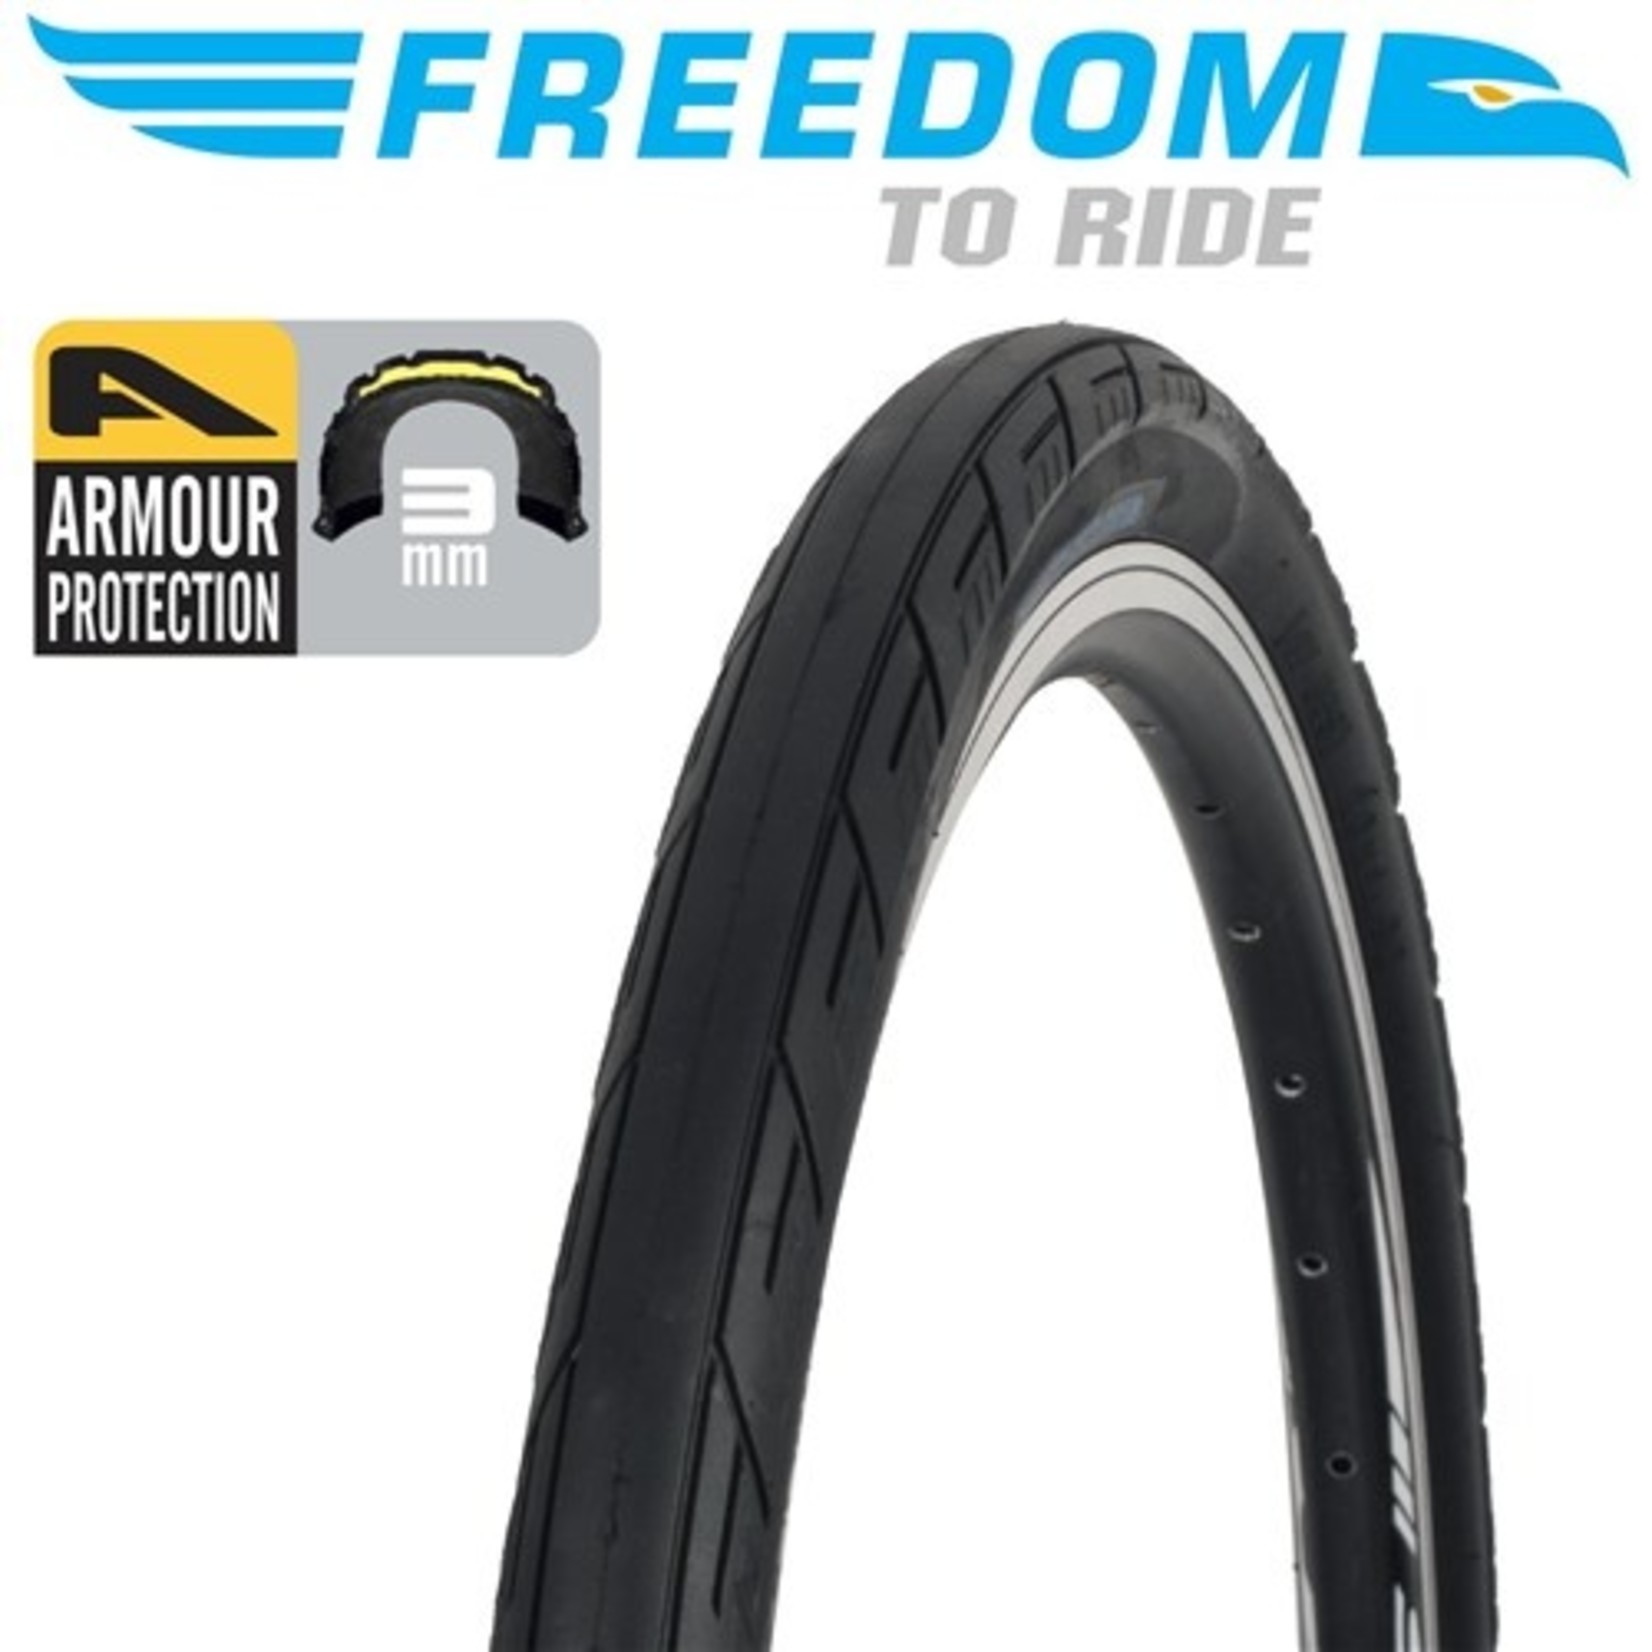 Freedom 2 X Freedom Bike Tyre - Roadrunner Armour Protection - 26" X 1.9" - Tyre (Pair)